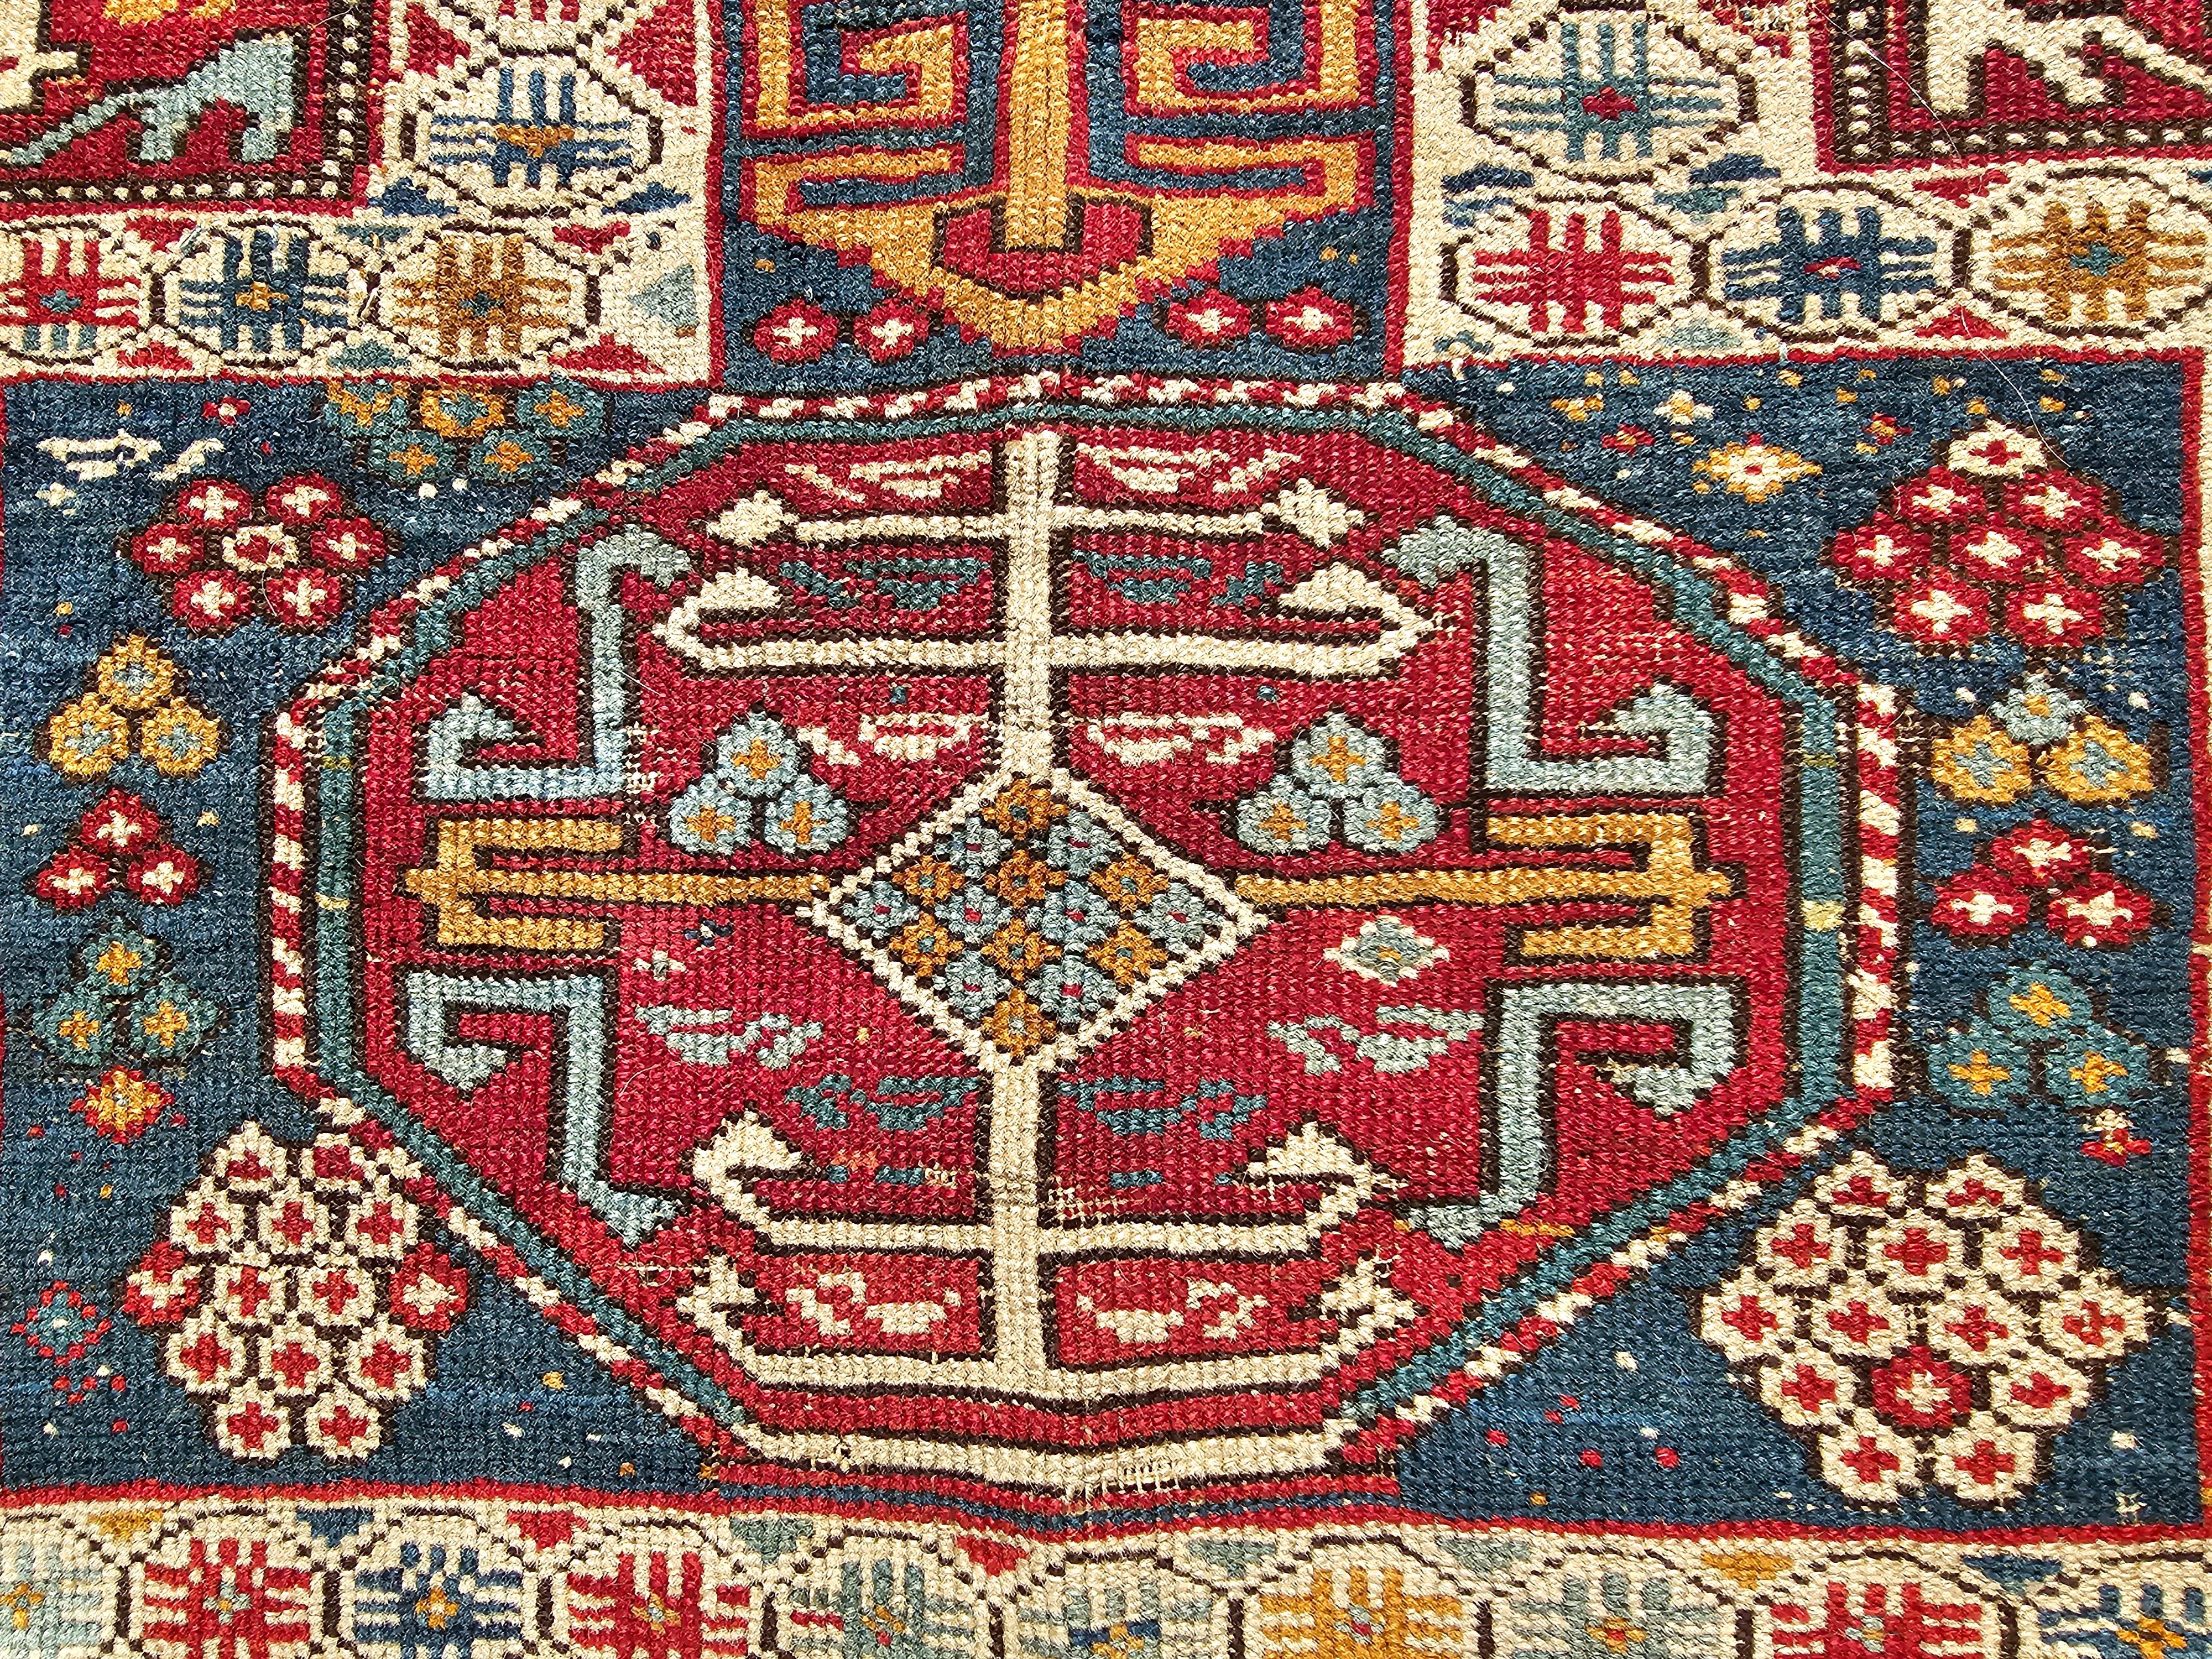 Azerbaijani  Early 1900s Caucasian Kuba Area Rug in French Blue, Red, Ivory, Yellow For Sale